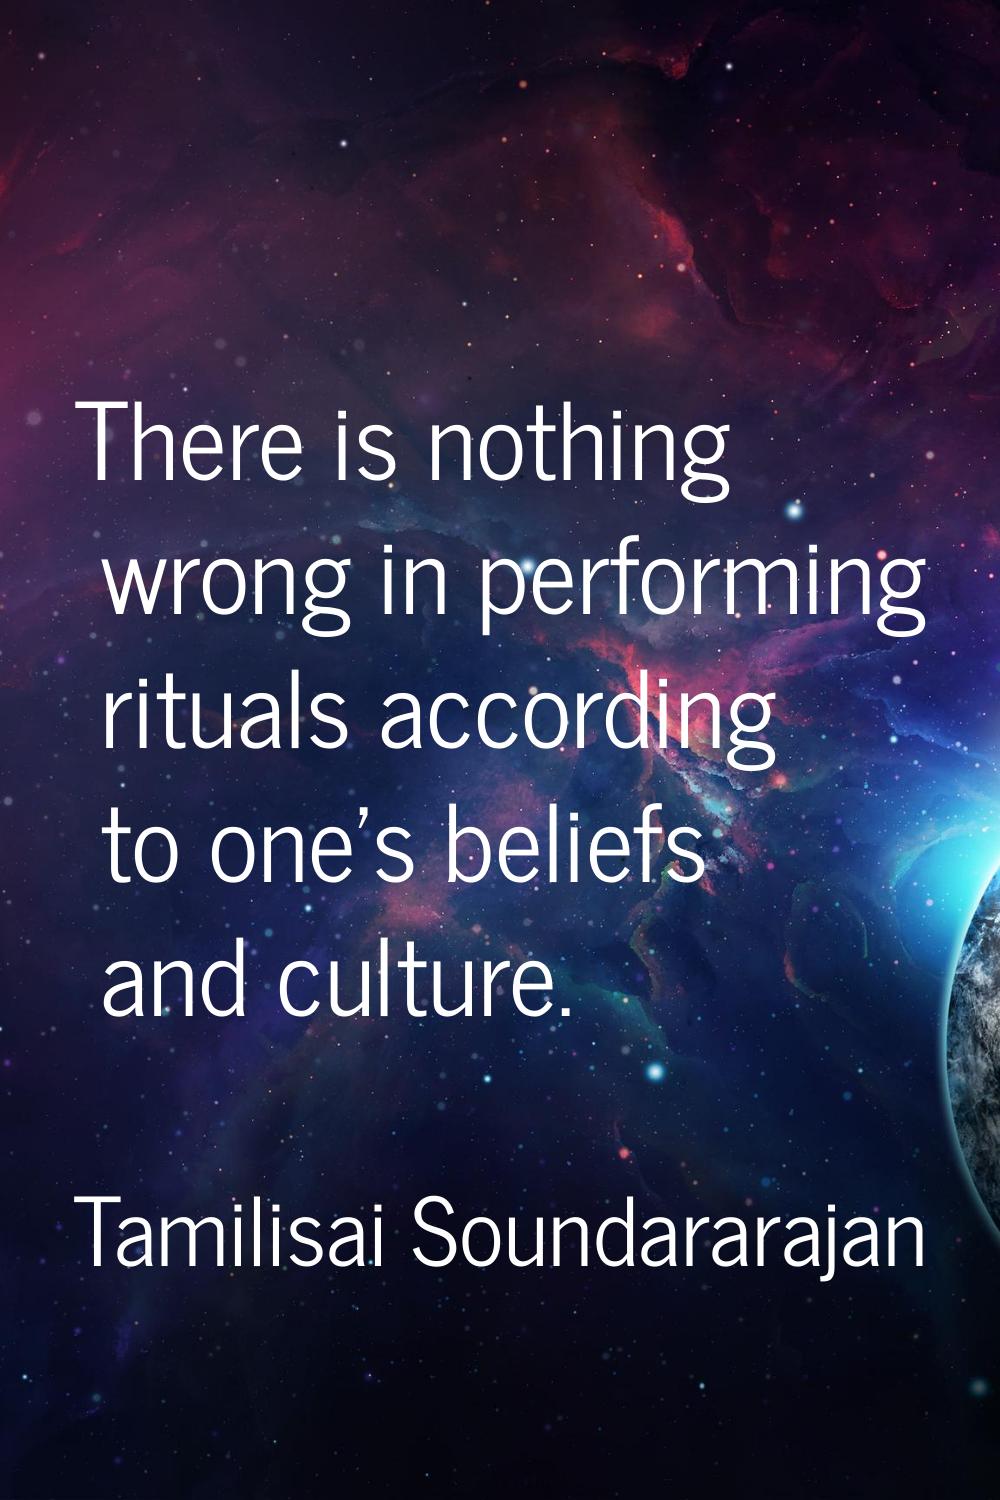 There is nothing wrong in performing rituals according to one's beliefs and culture.